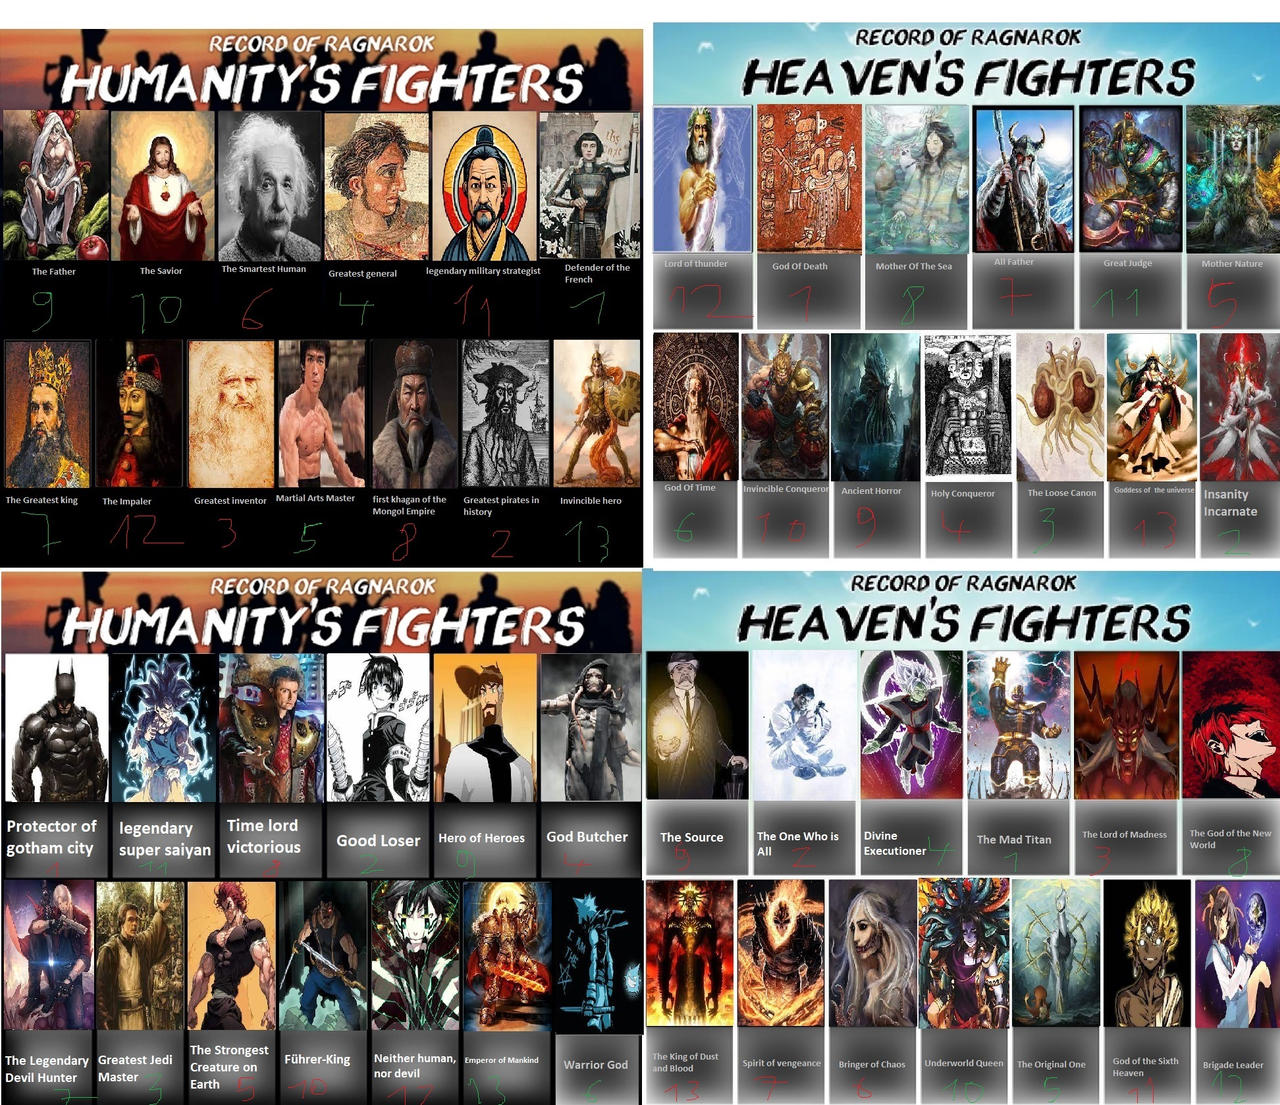 Record of Ragnarok: Who Are the 13 Human Combatants in the